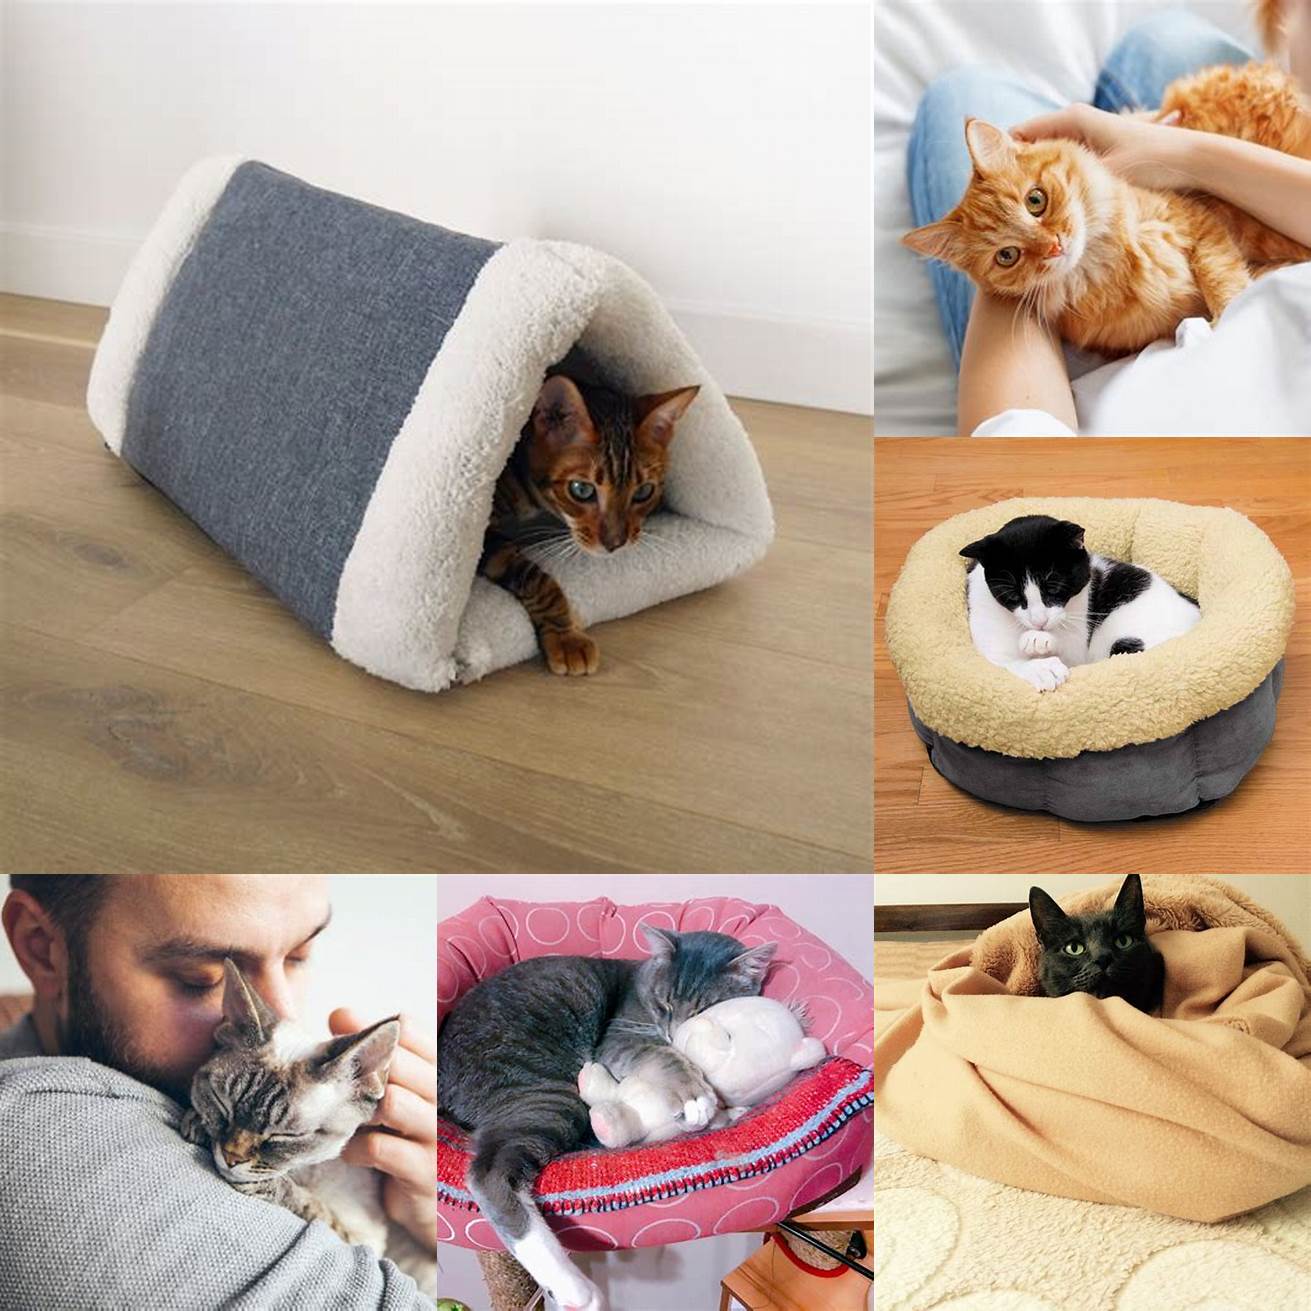 Comfort for your cat Cats love to snuggle up in tight spaces so a pocket shirt can provide them with a sense of security and comfort while being carried around